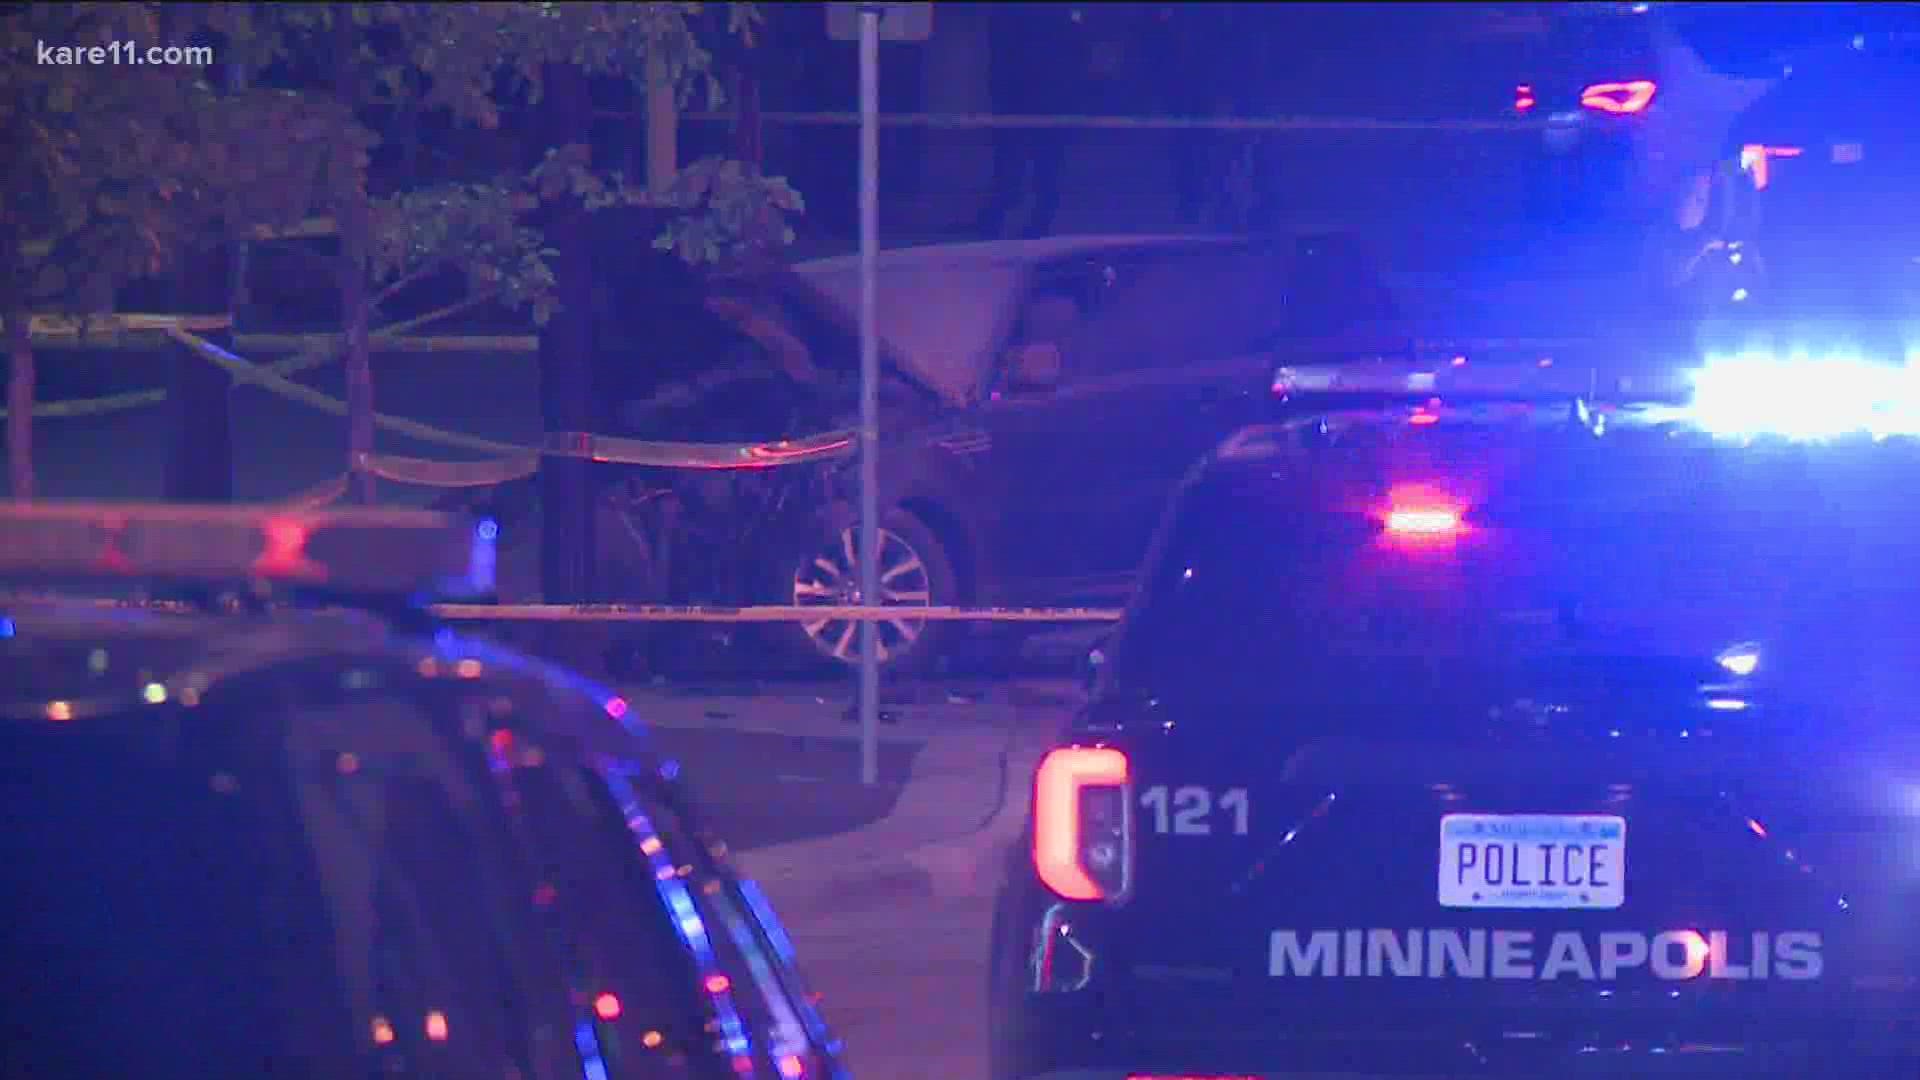 Minneapolis Police say they recovered guns from two vehicles that crashed at the intersection of 5th St. North and 6th Ave. North Wednesday night.